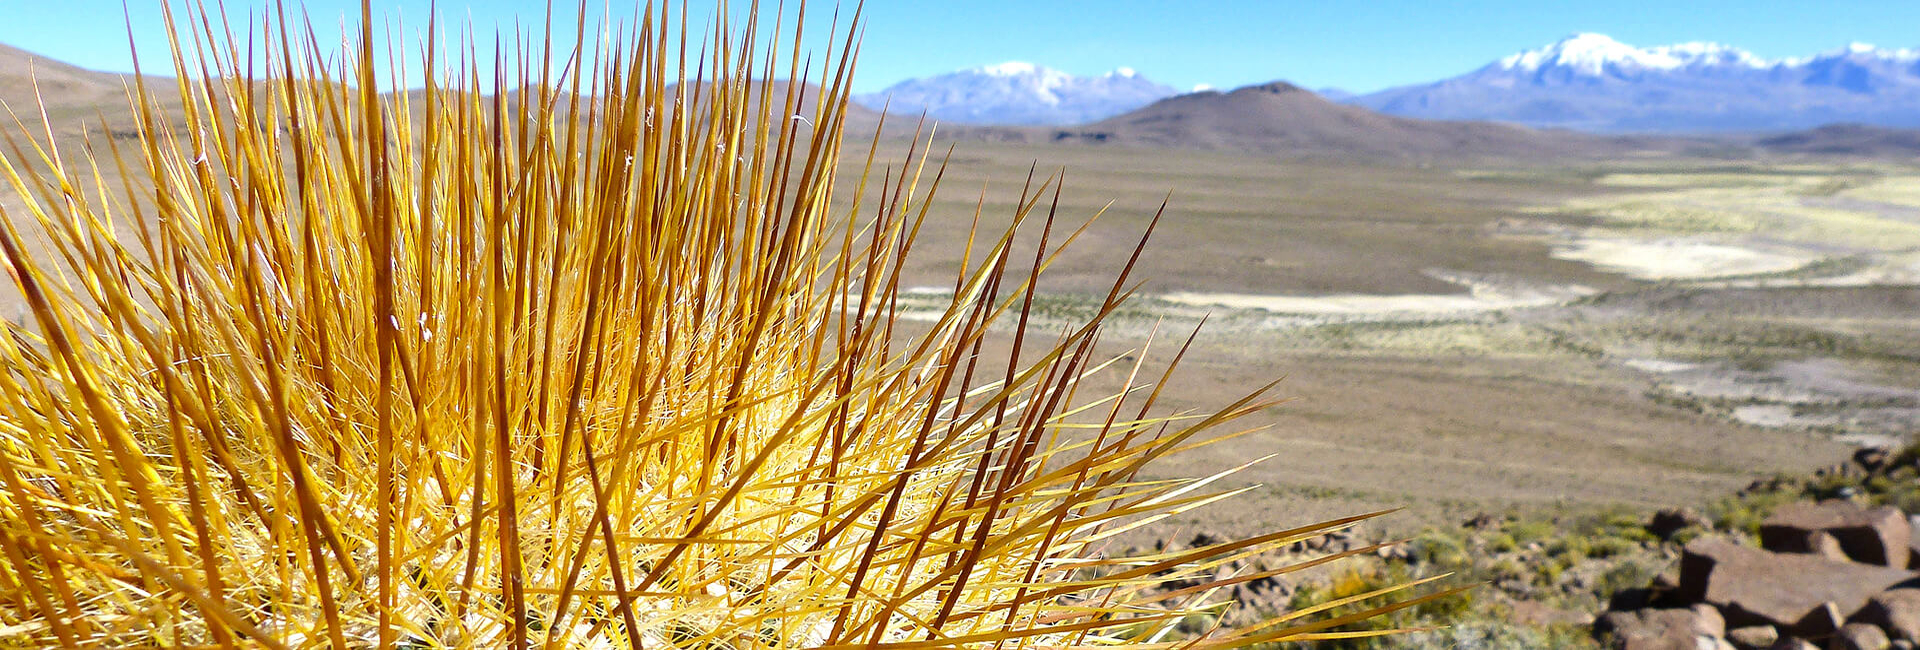 Cactus in the Chilean Andes, Altiplano